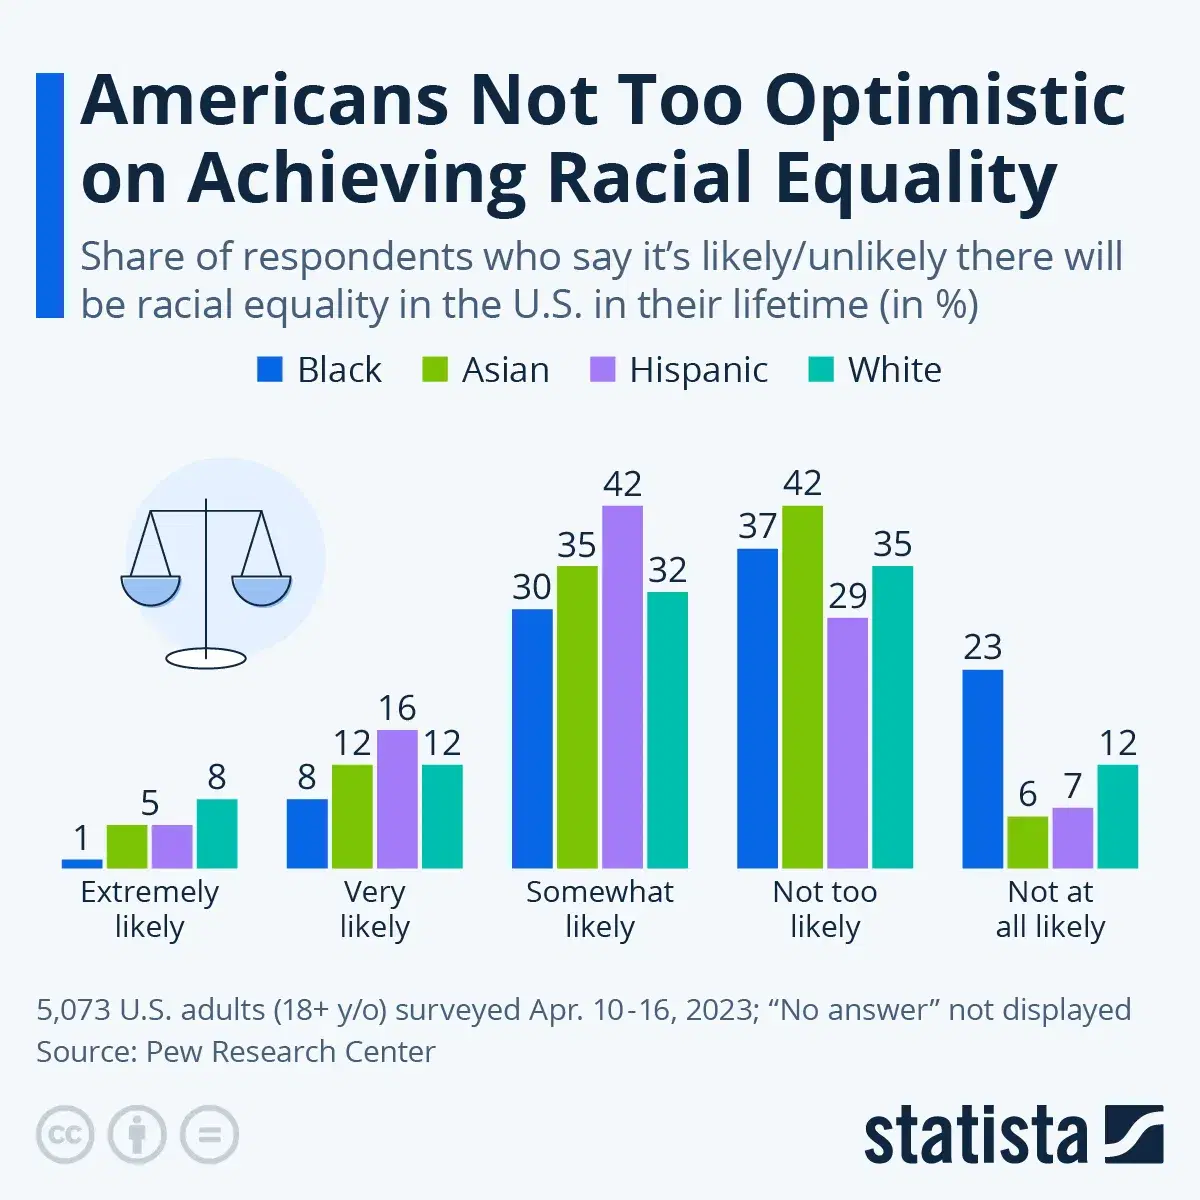 Americans Generally Not Optimistic on Achieving Racial Equality